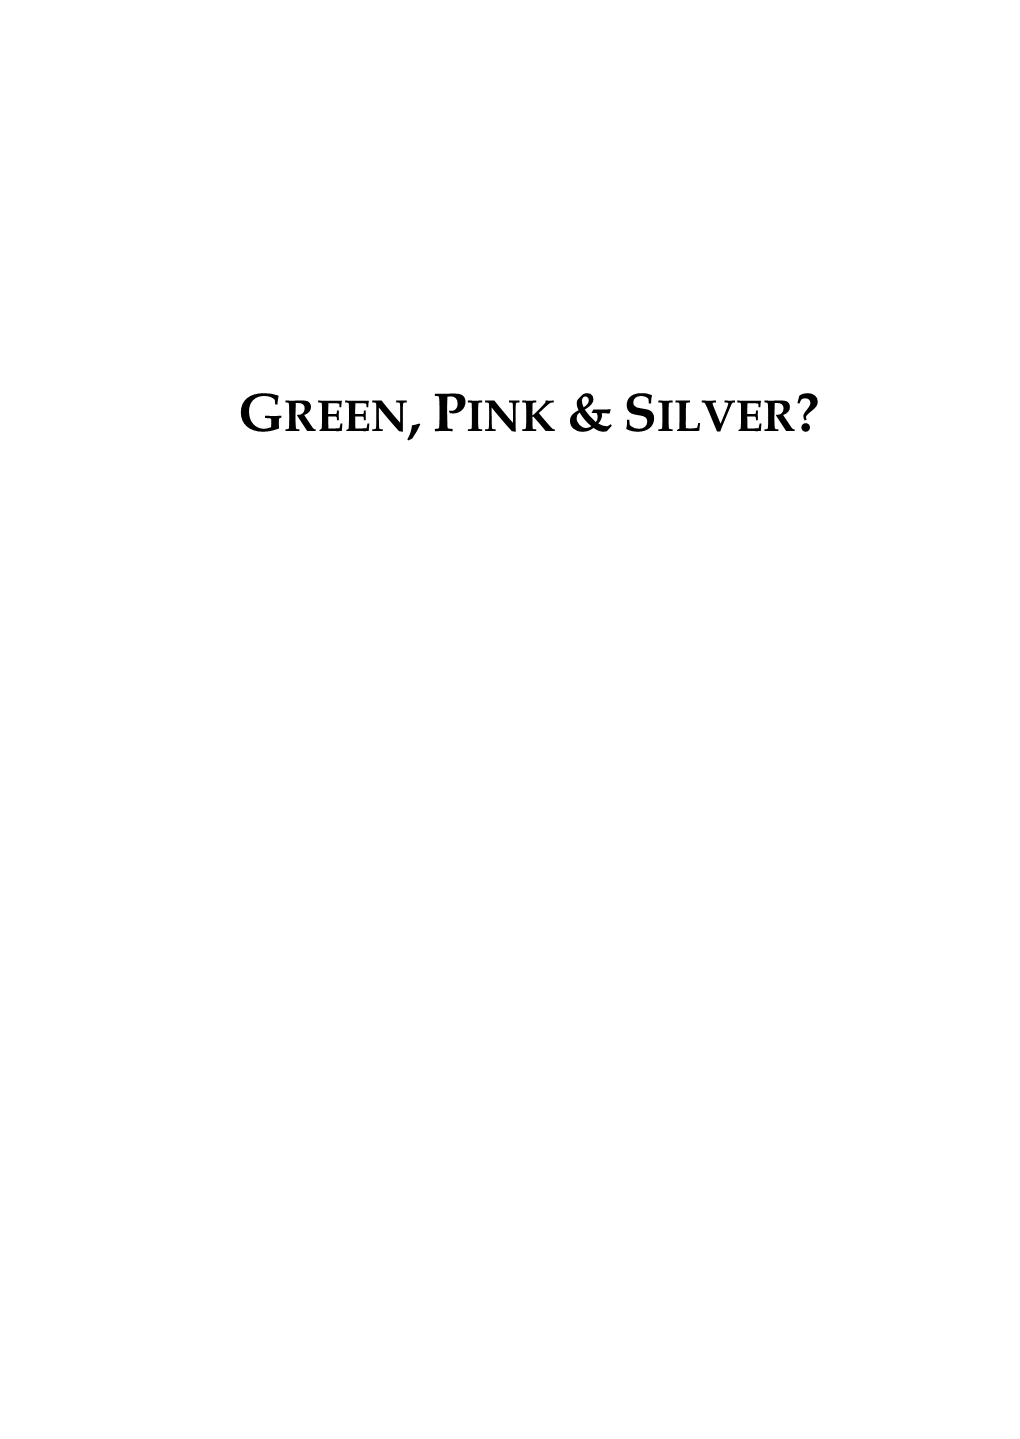 Green, Pink & Silver?